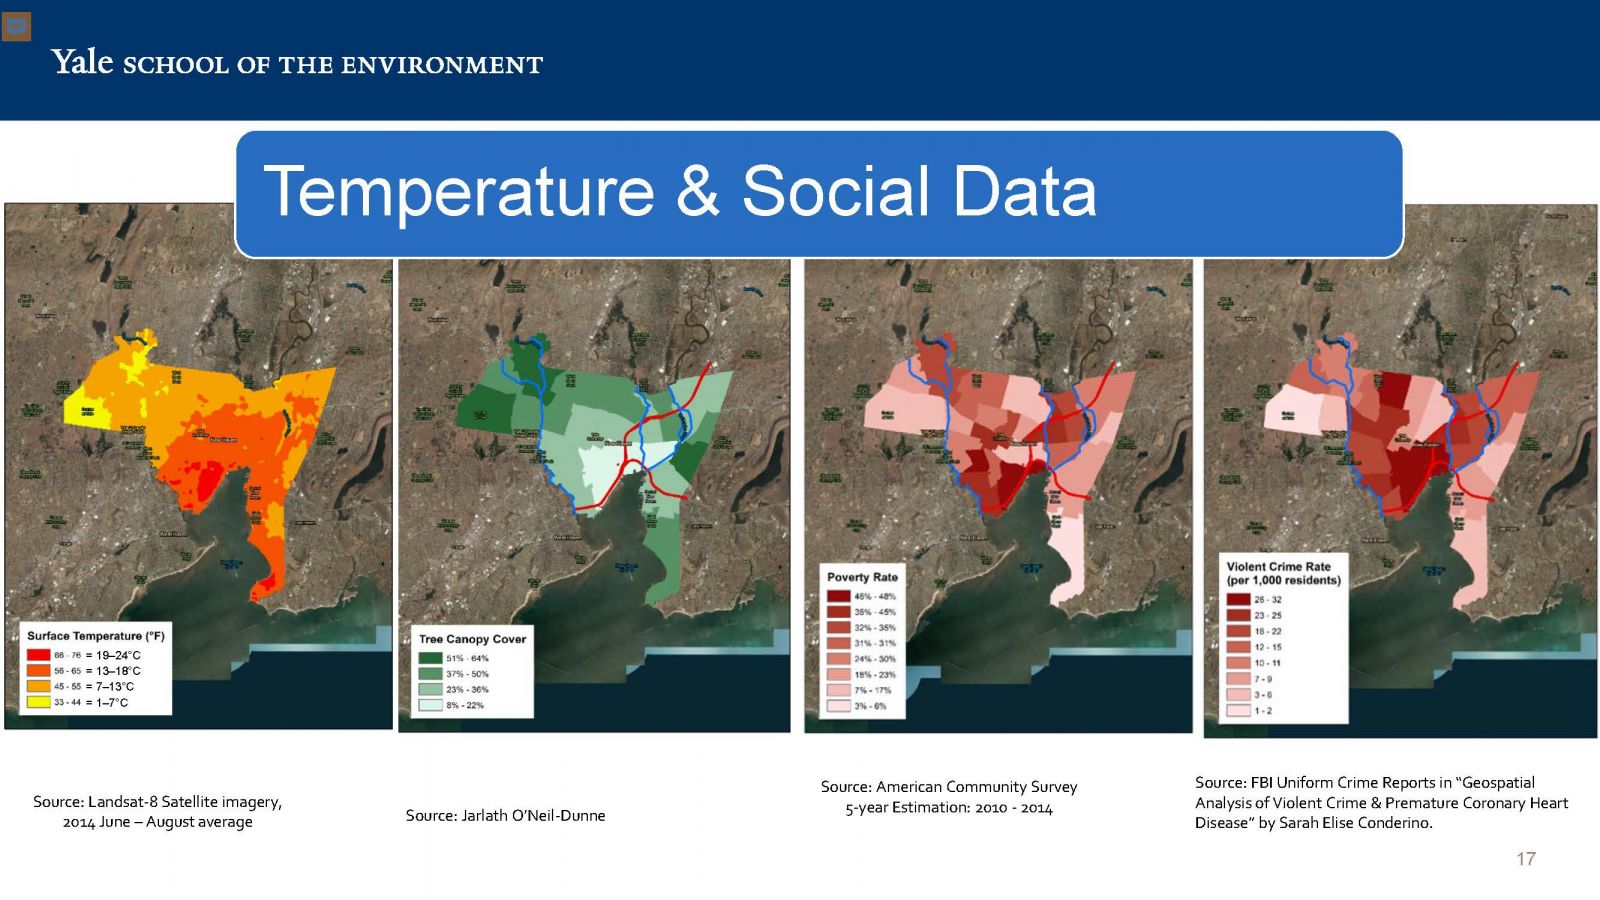 An image of data maps from New Haven, CT showing surface temperatures, tree canopy cover, poverty rates and violent crime rates.